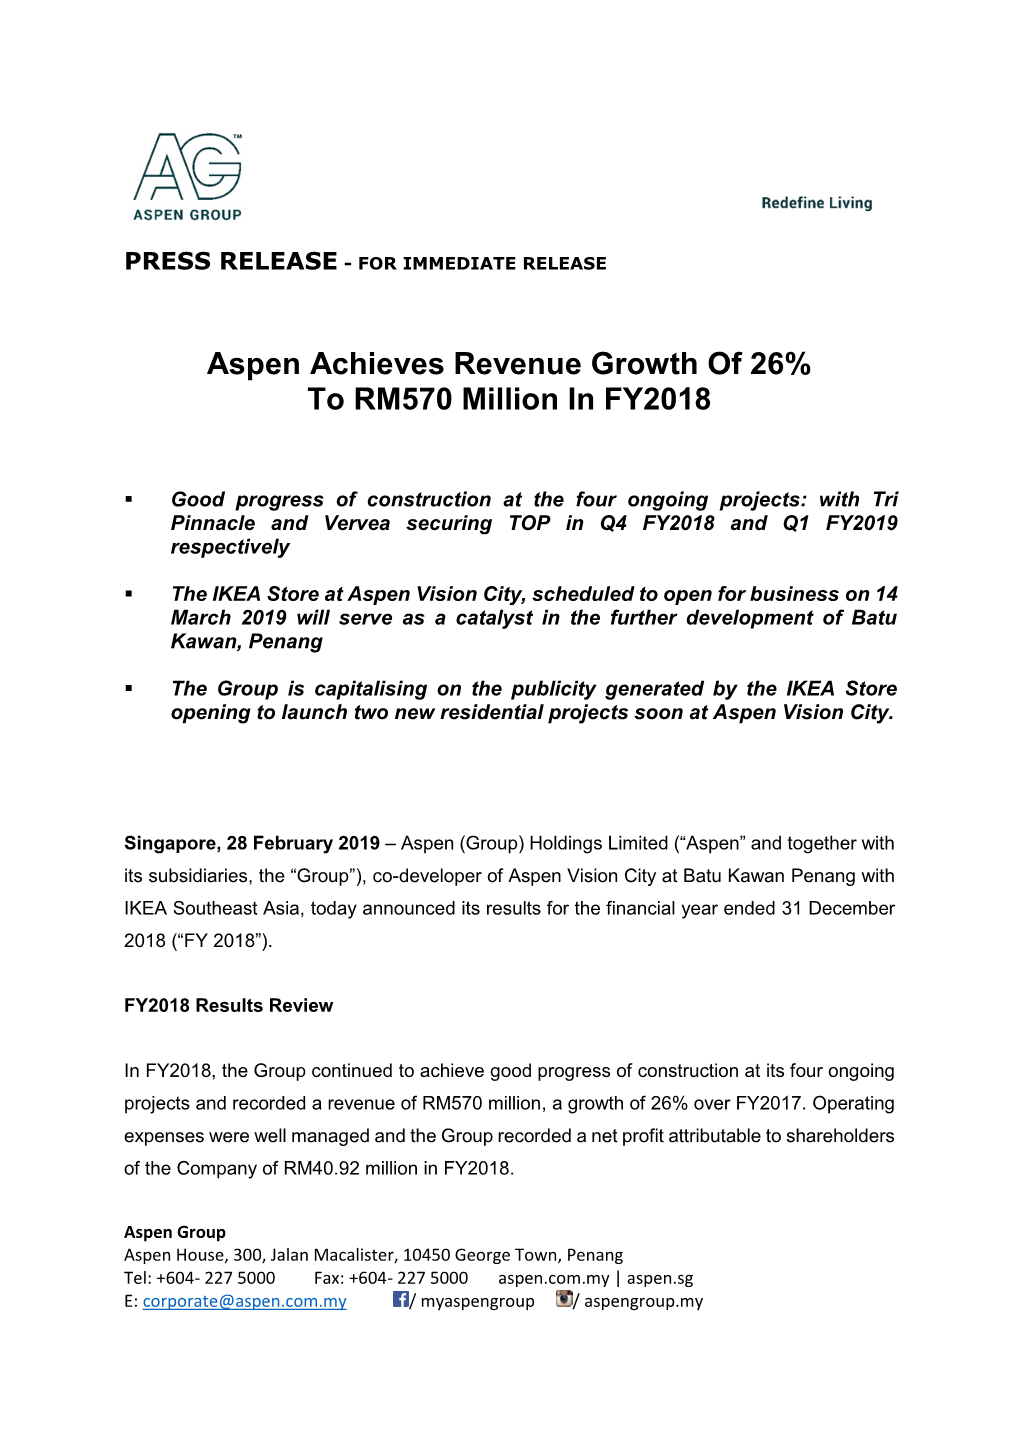 Aspen Achieves Revenue Growth of 26% to RM570 Million in FY2018